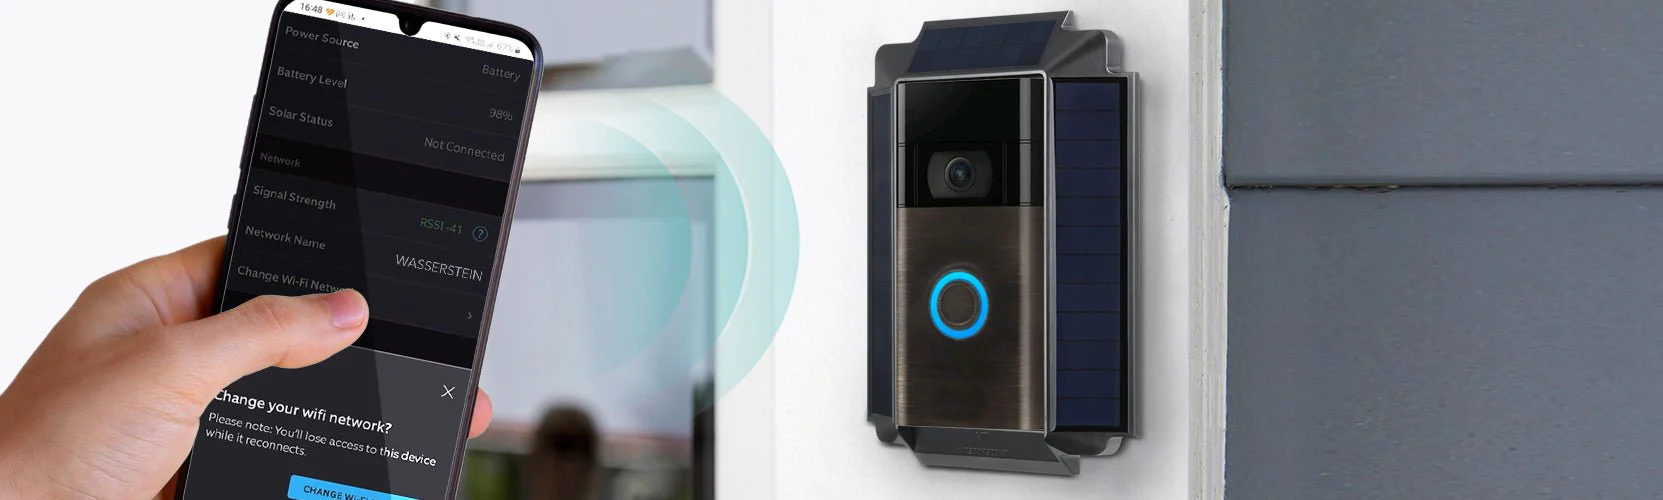 how-do-i-change-the-wifi-connection-on-ring-video-doorbell